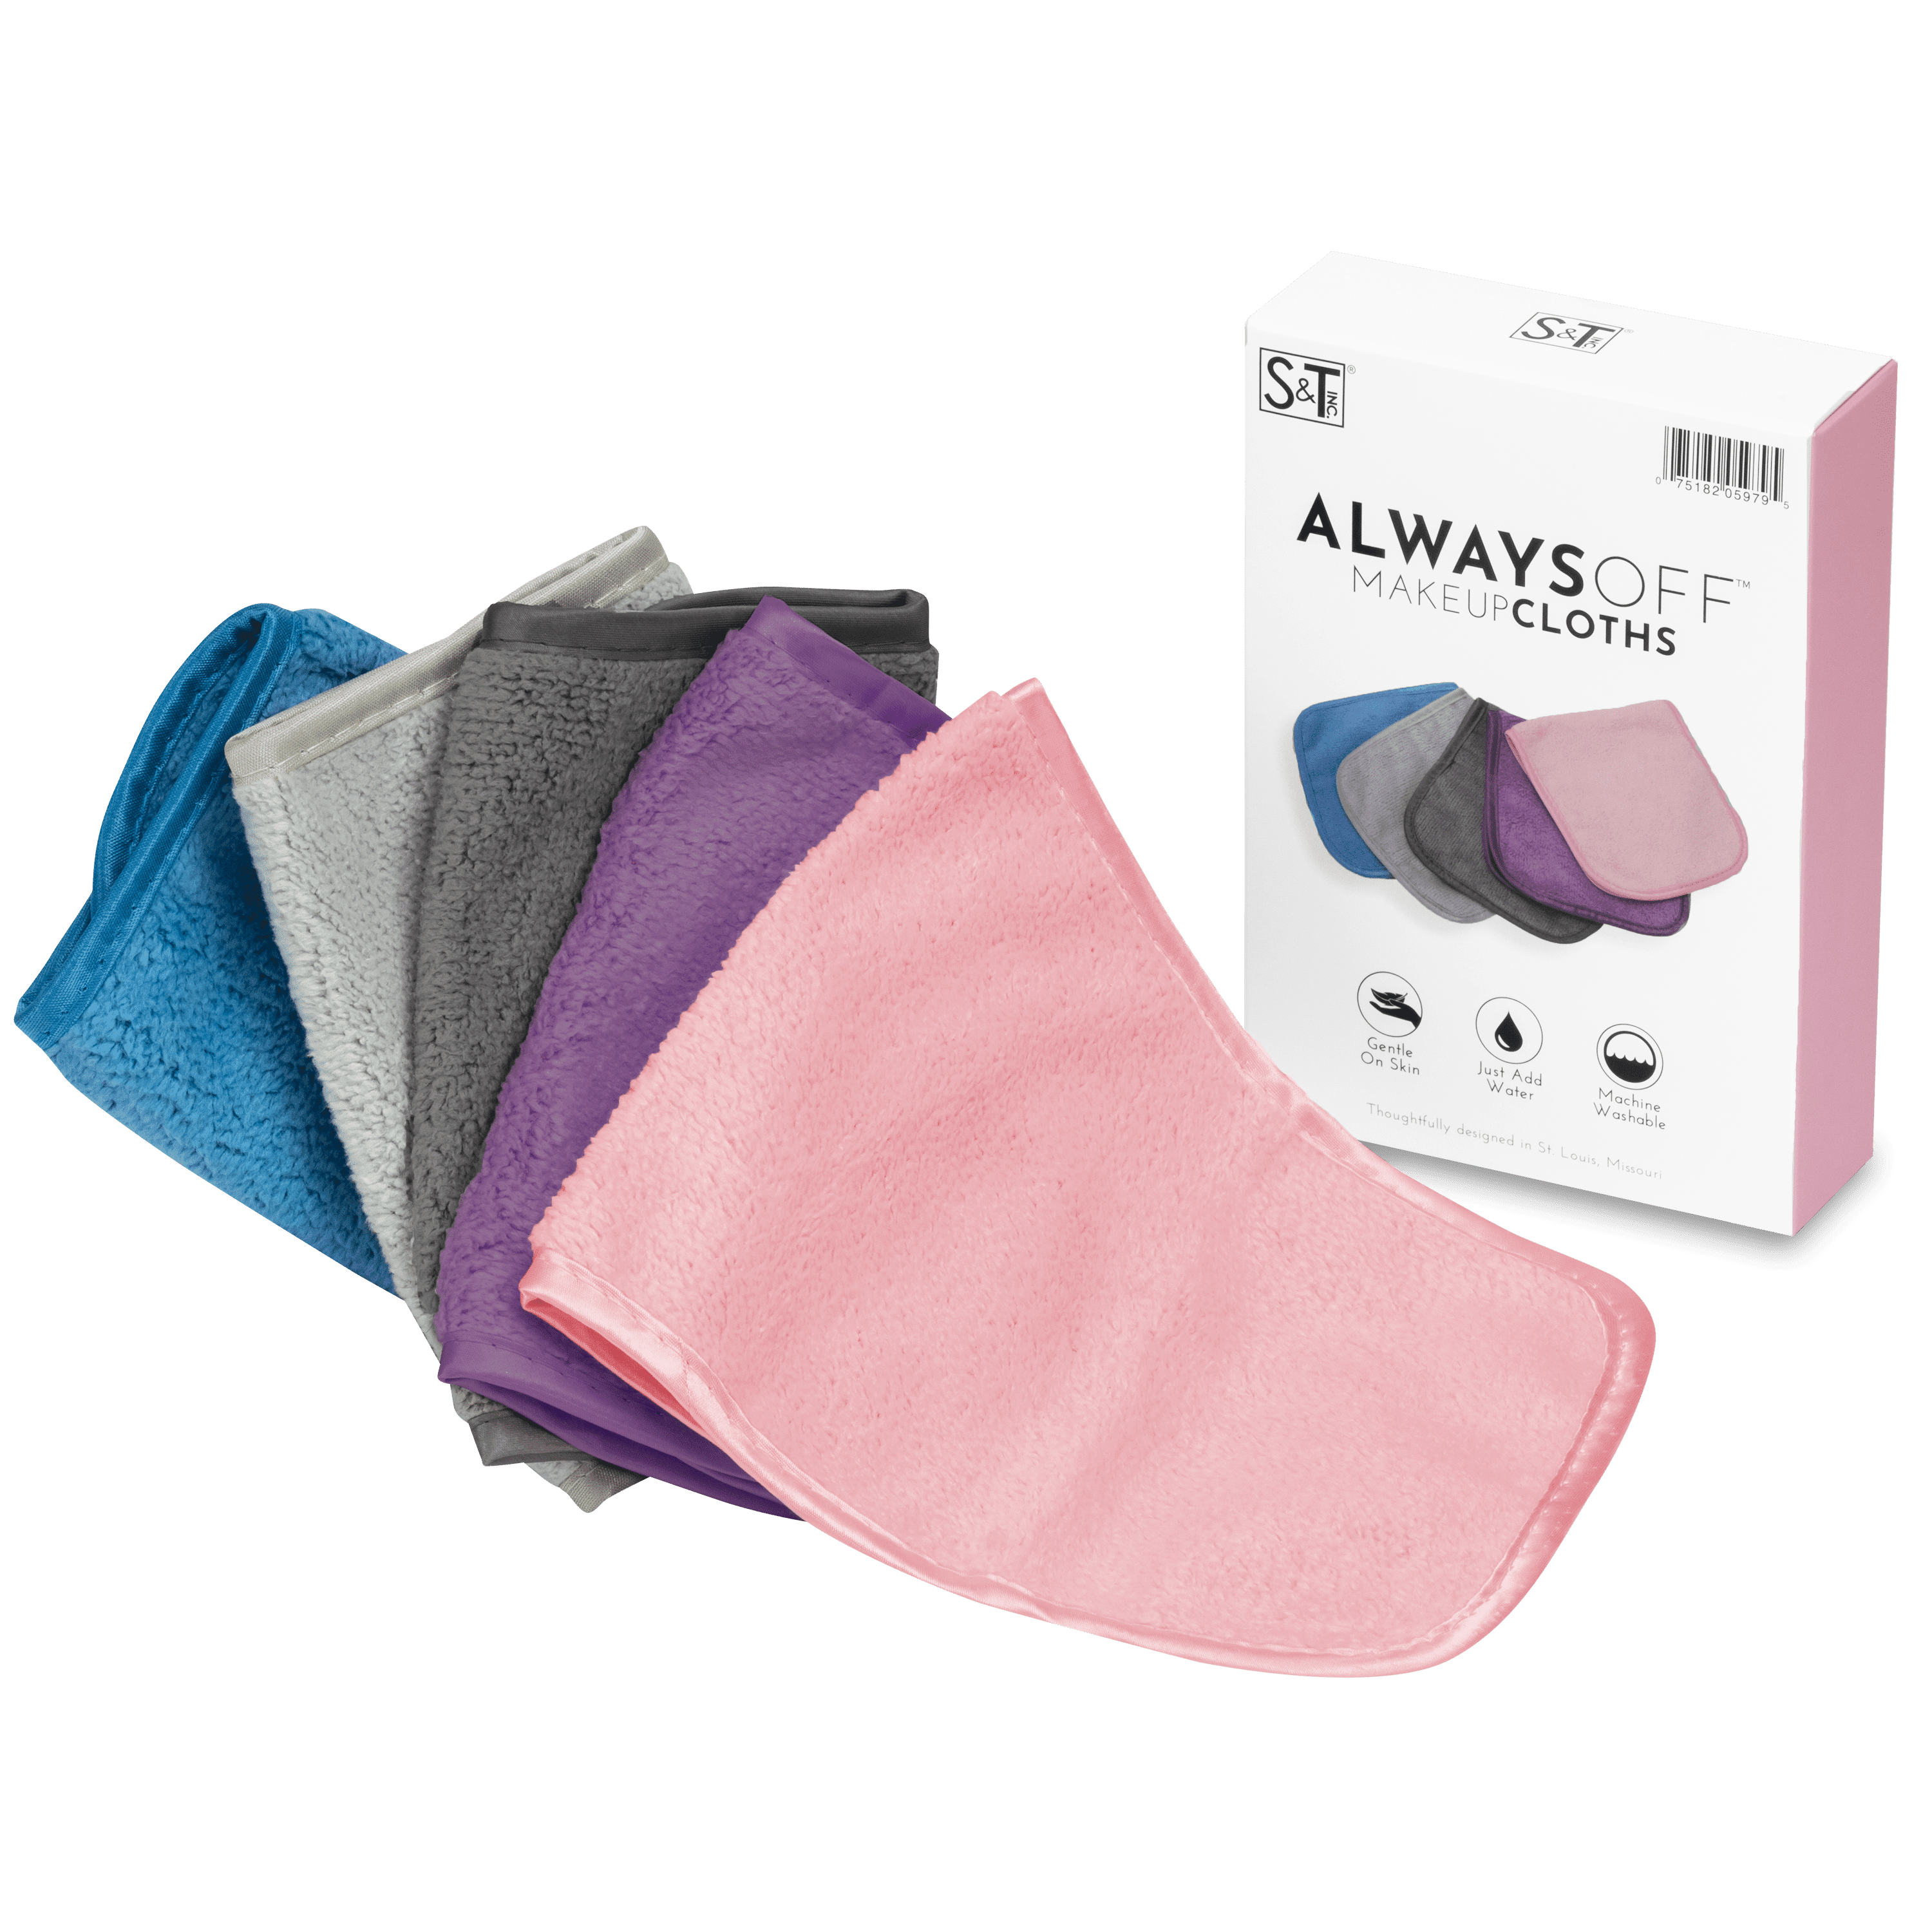 MICROFIBER CLOTHS MAKEUP REMOVER FACE CLOTHS 6 or 12 Pack 